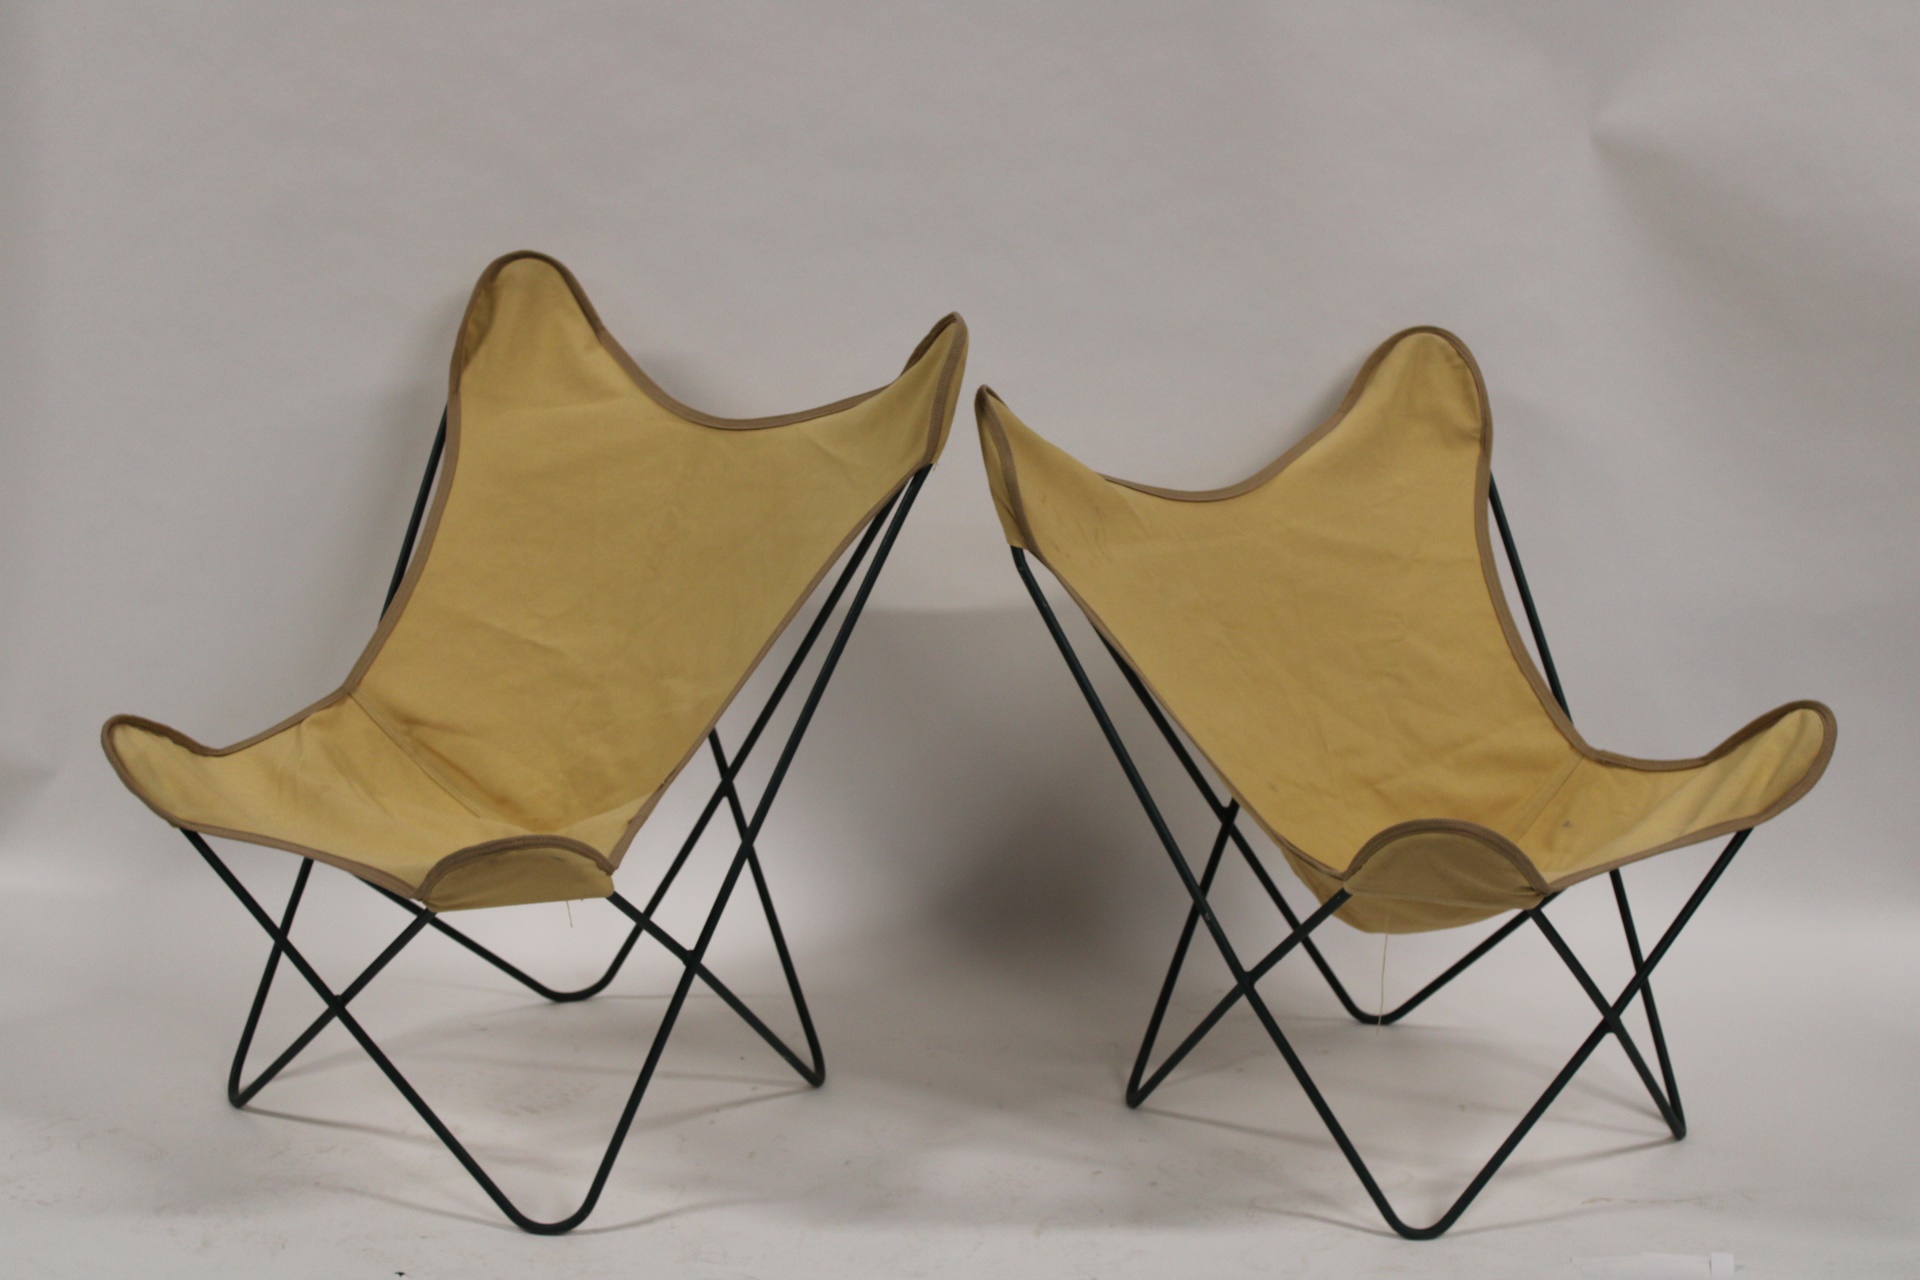 A MIDCENTURY PAIR OF BUTTERFLY